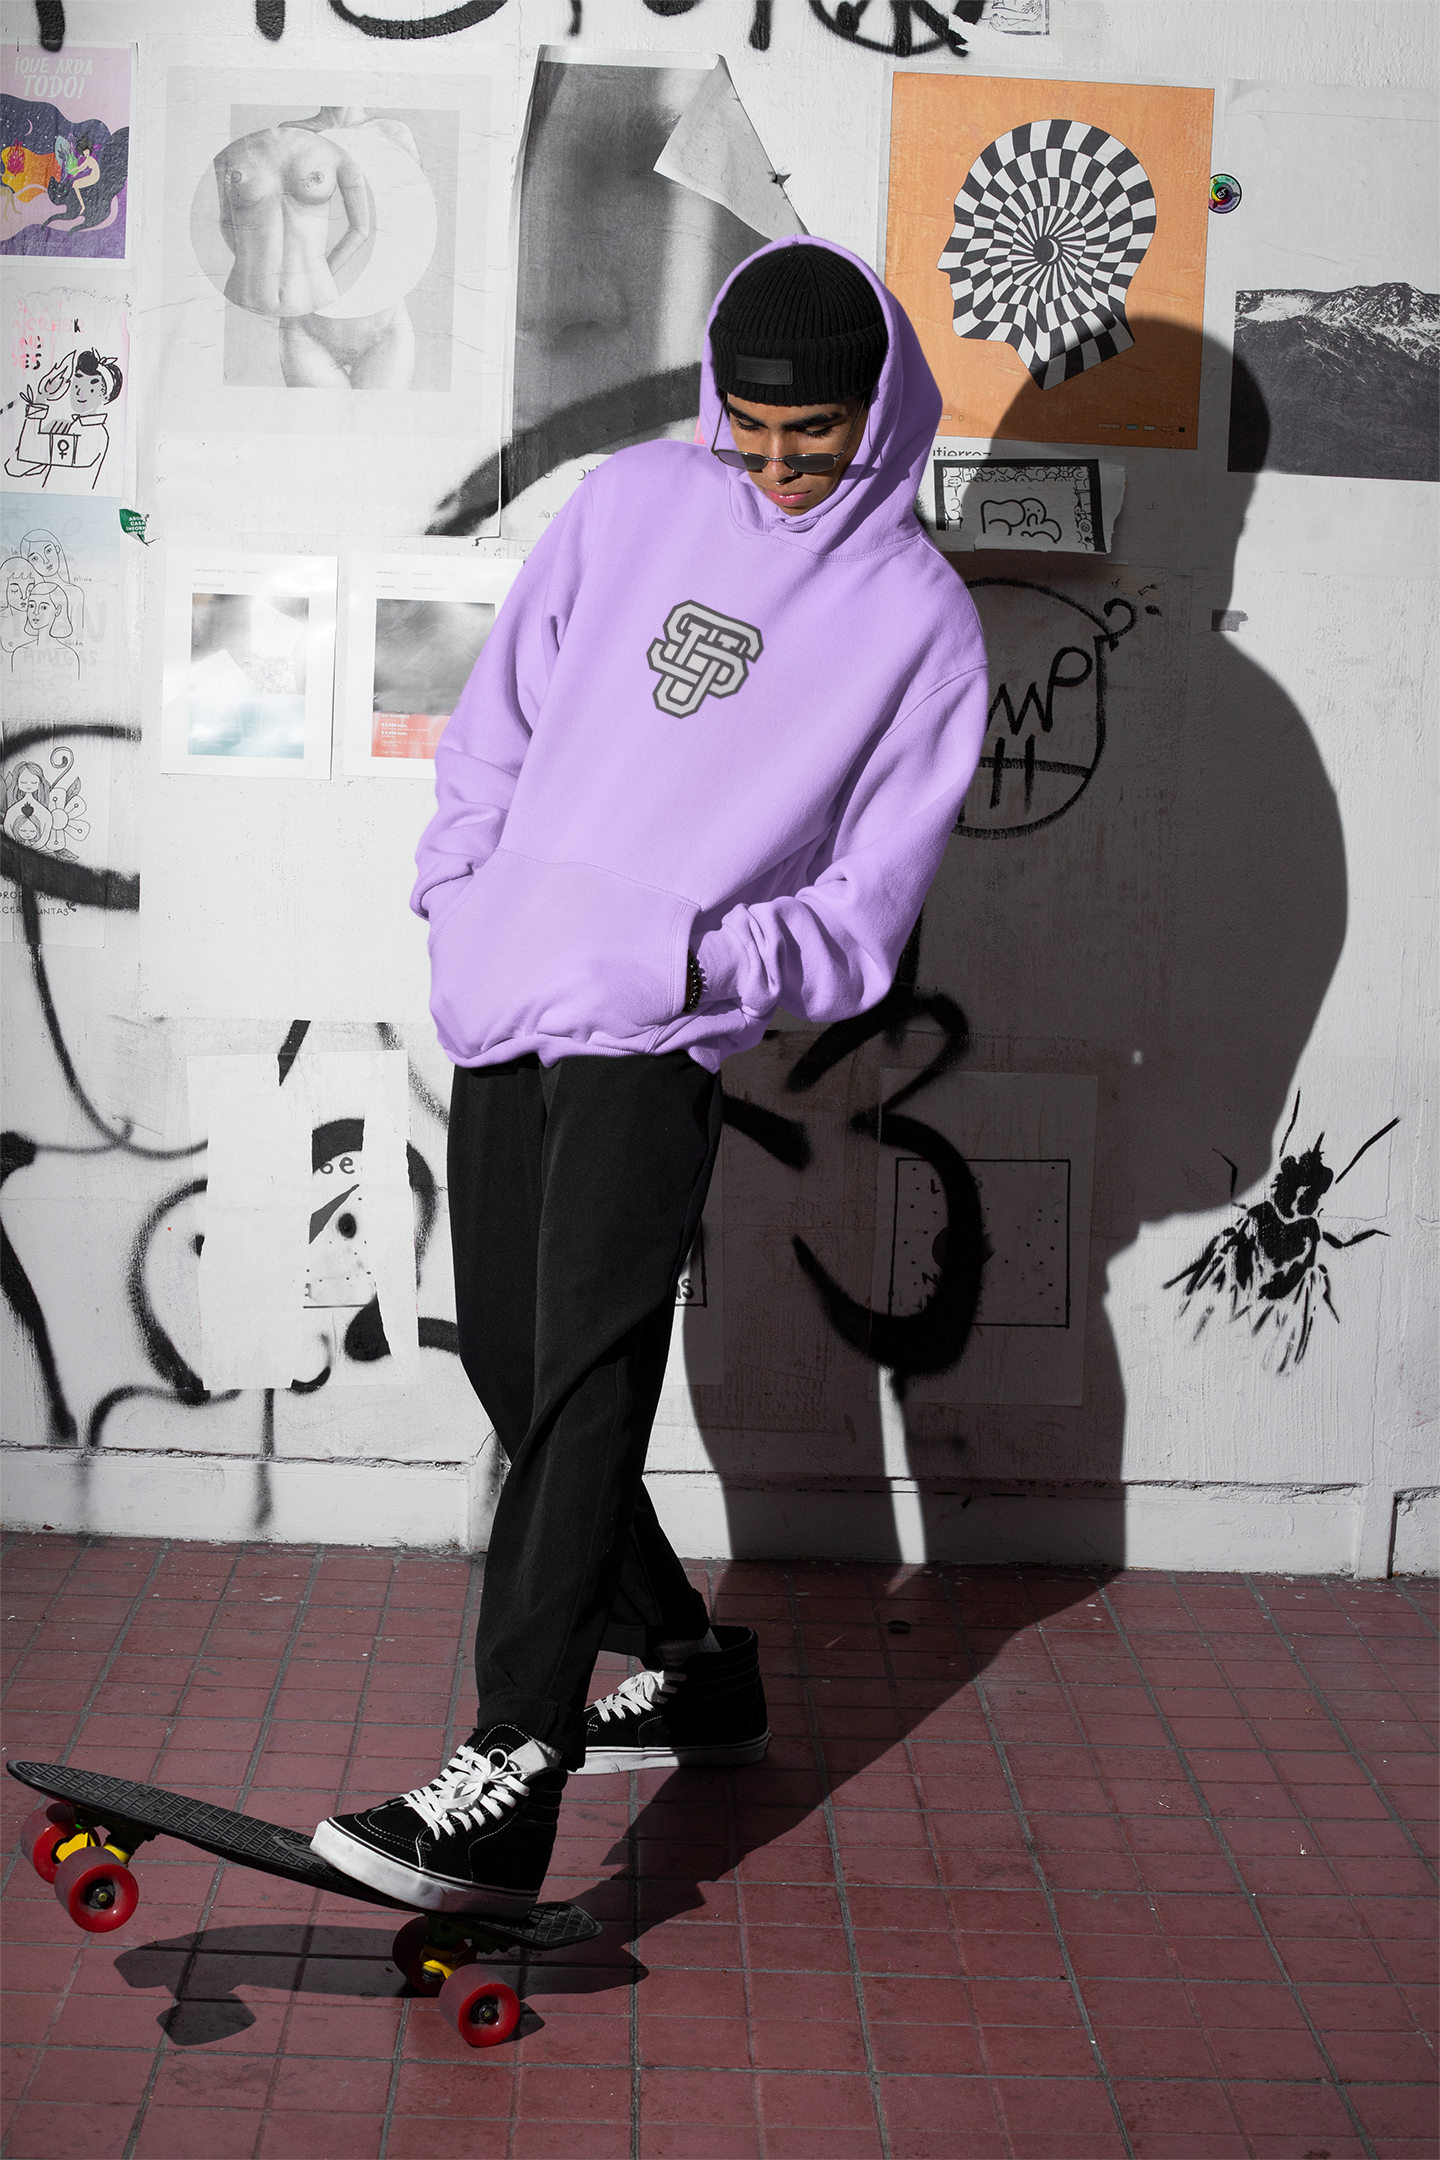 Drop Some Money Oversized Fit Hoodie